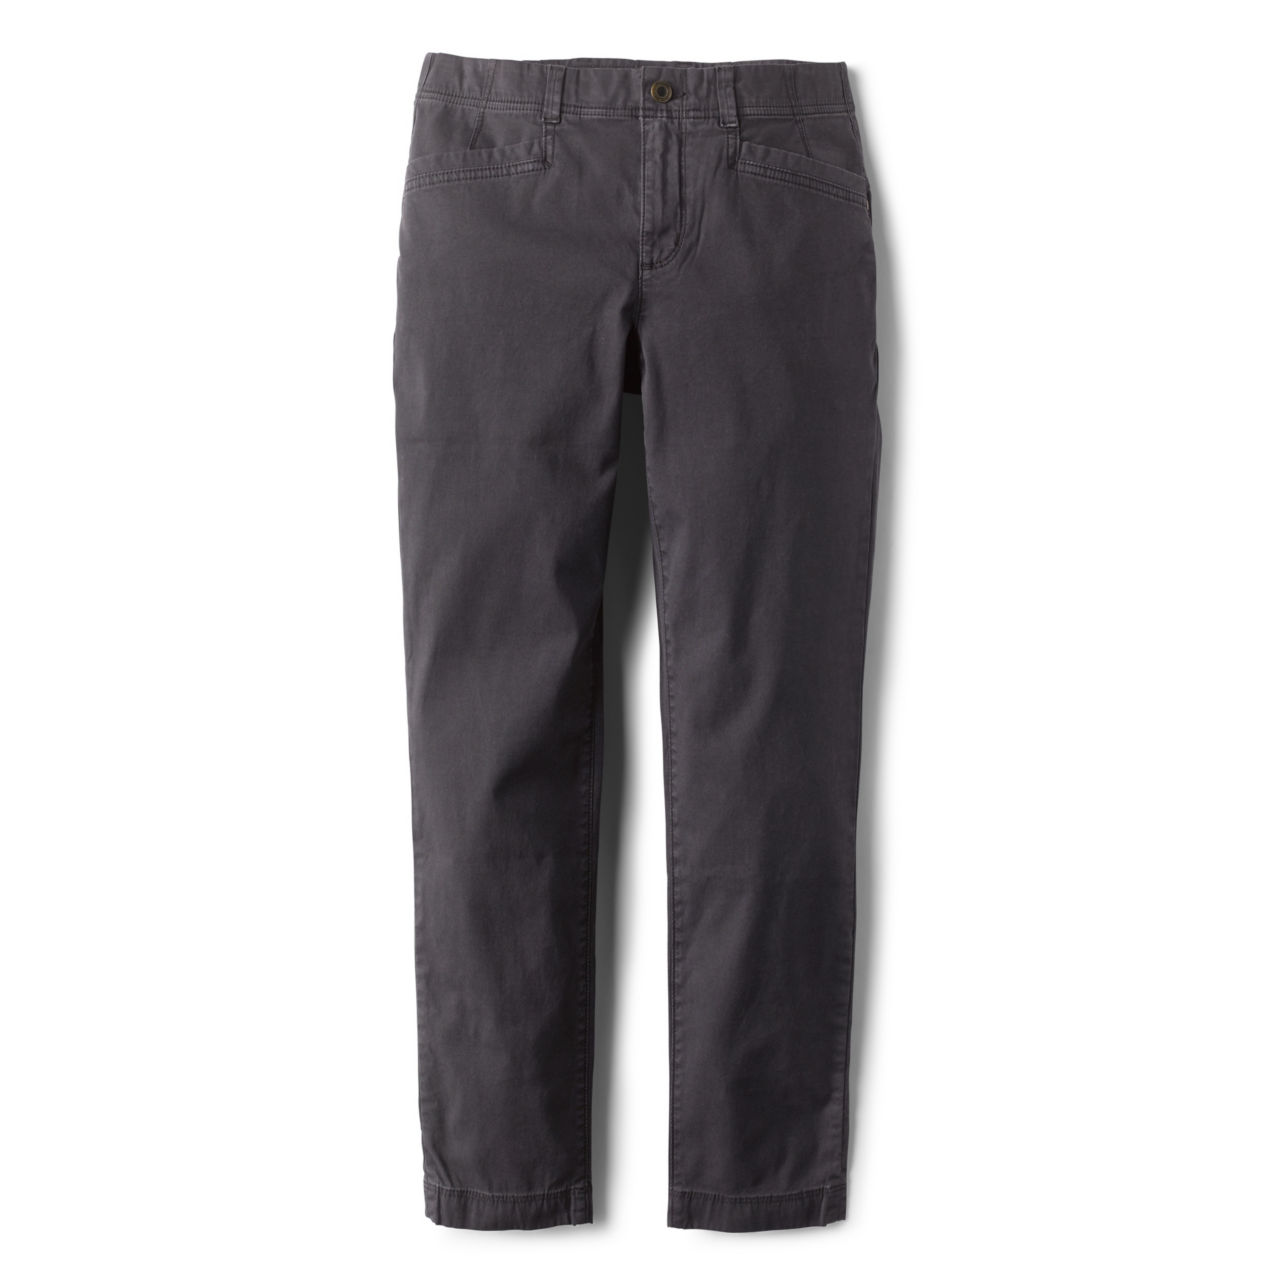 Everyday Chino Natural Fit Straight-Leg Ankle Pants -  image number 4